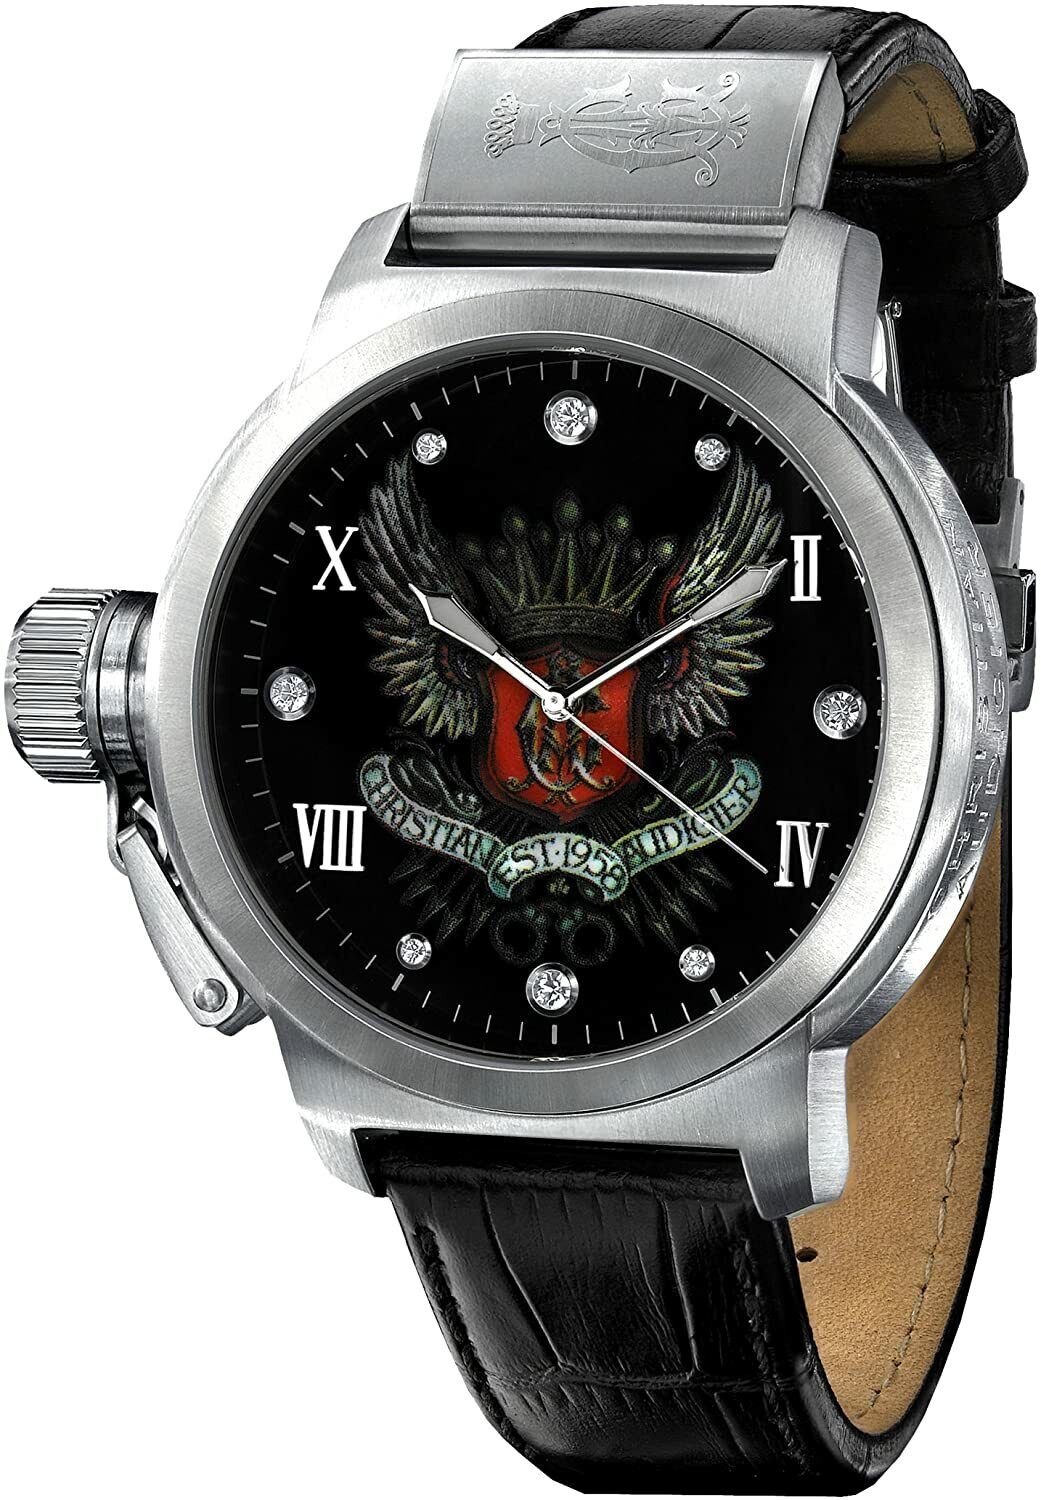 Brand New Christian Audigier "Winged Crown" Watch Designed by Ed Hardy ETE-104